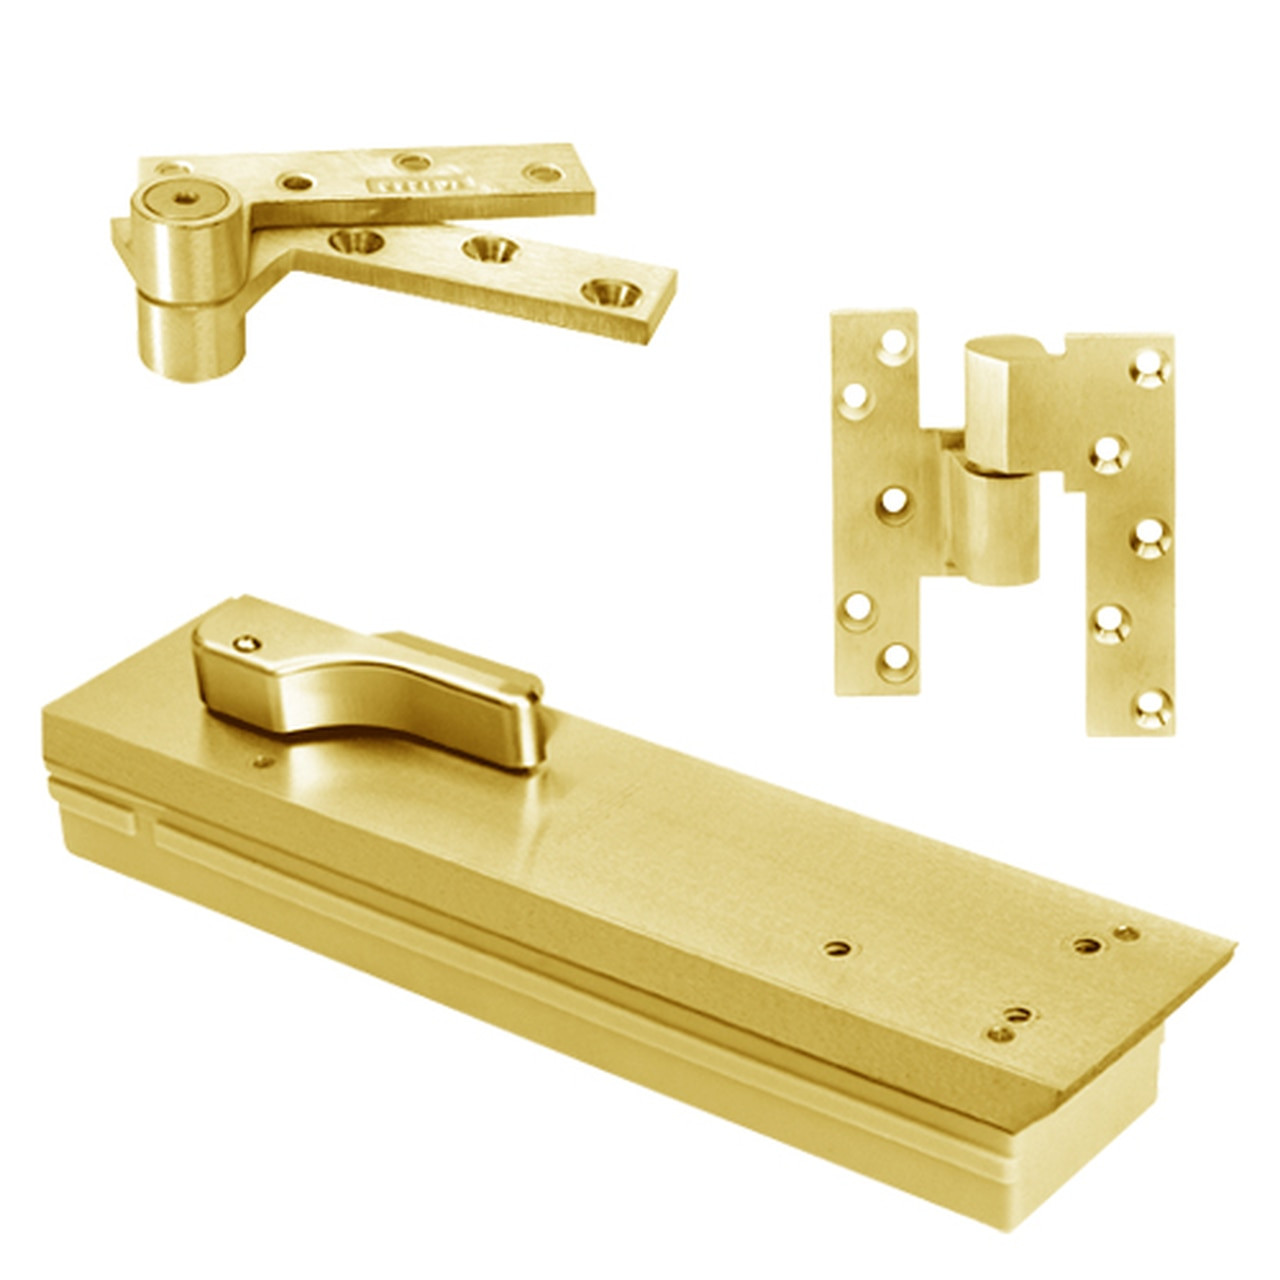 FQ5104NBC-LFP-LCC-RH-605 Rixson Q51 Series Fire Rated 3/4" Offset Hung Shallow Depth Floor Closers in Bright Brass Finish